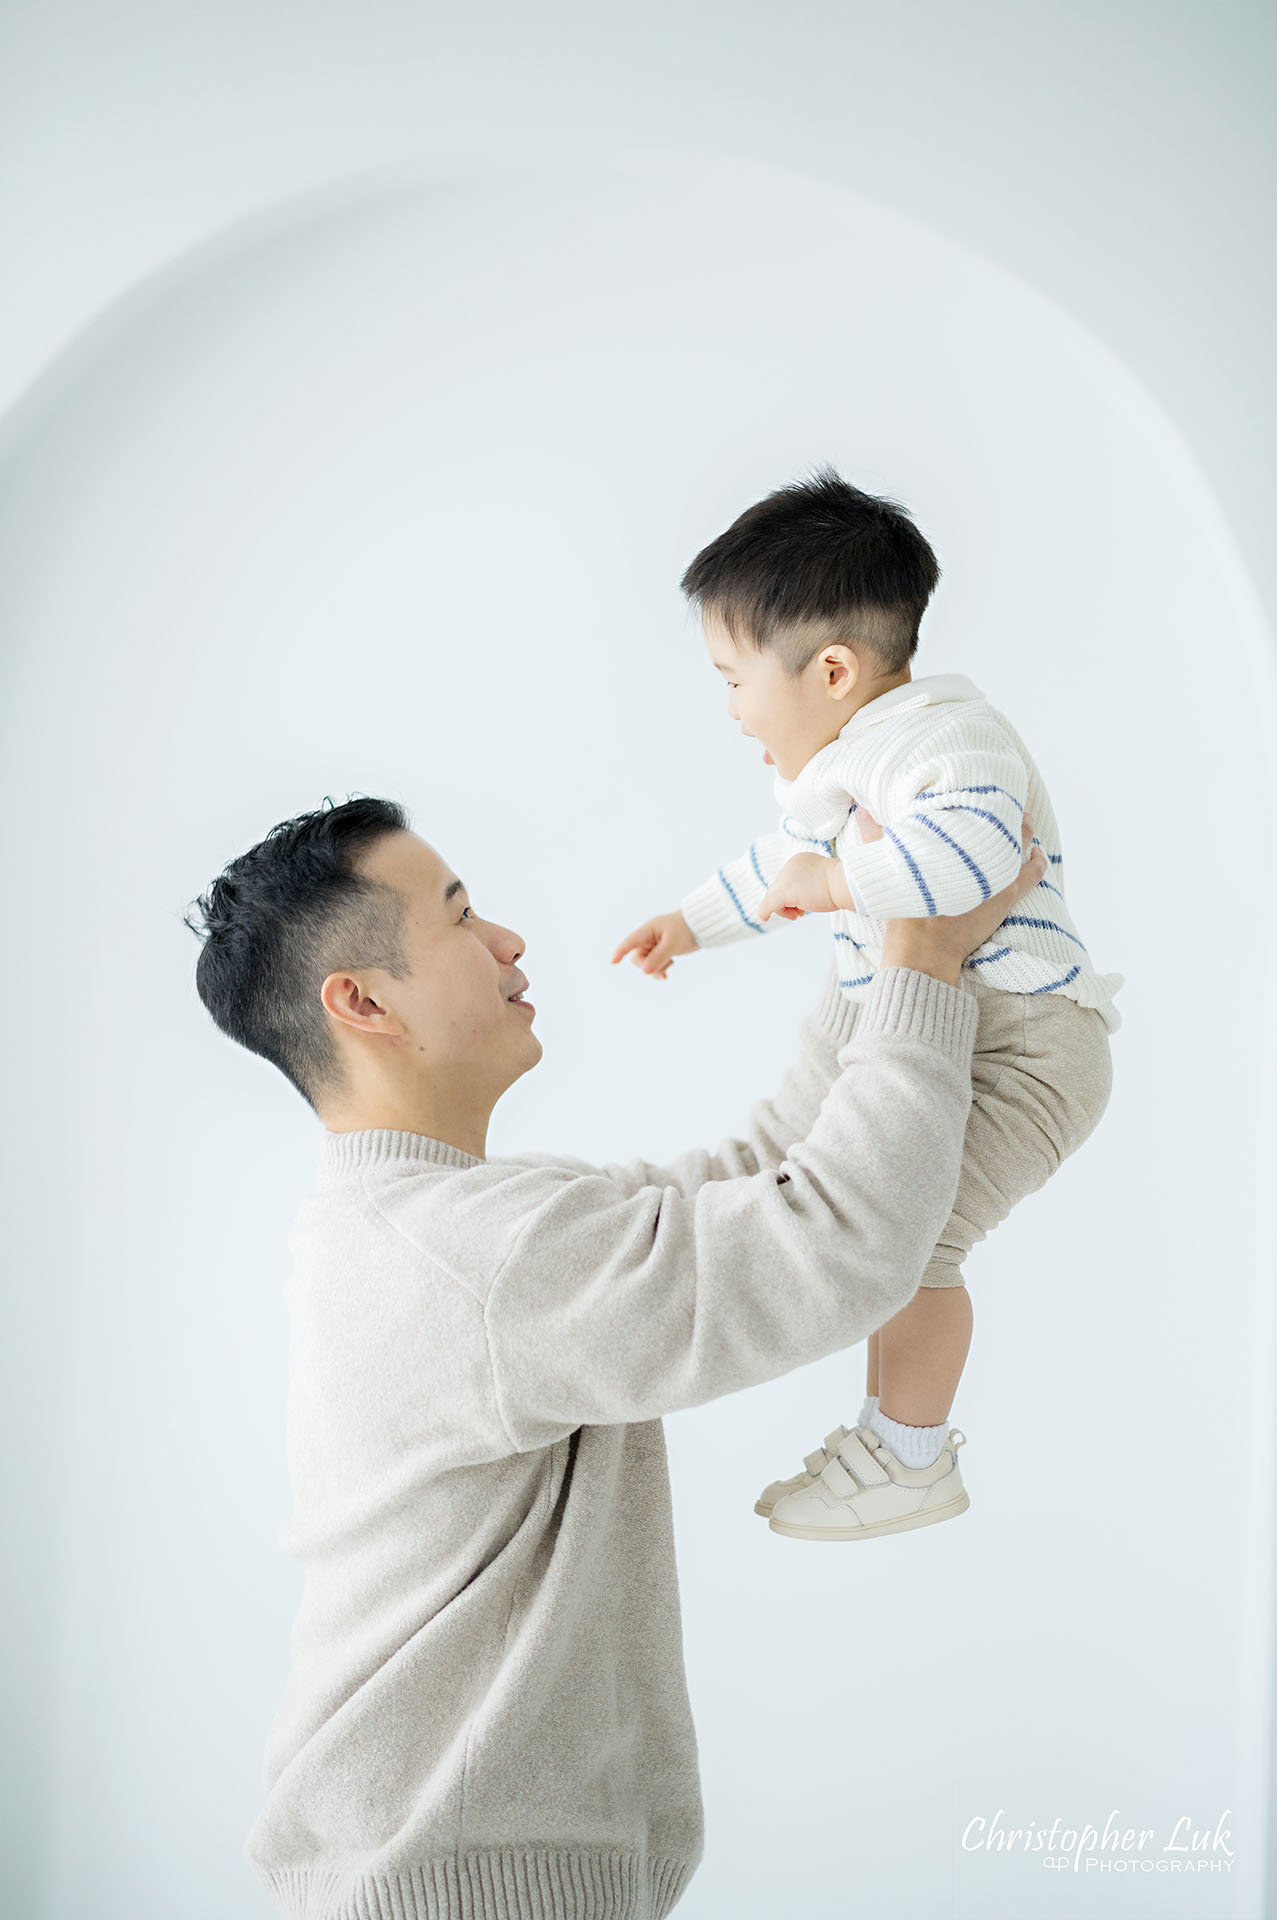 Father Dad Baby Boy Son Portrait Smile Play Toss Fun